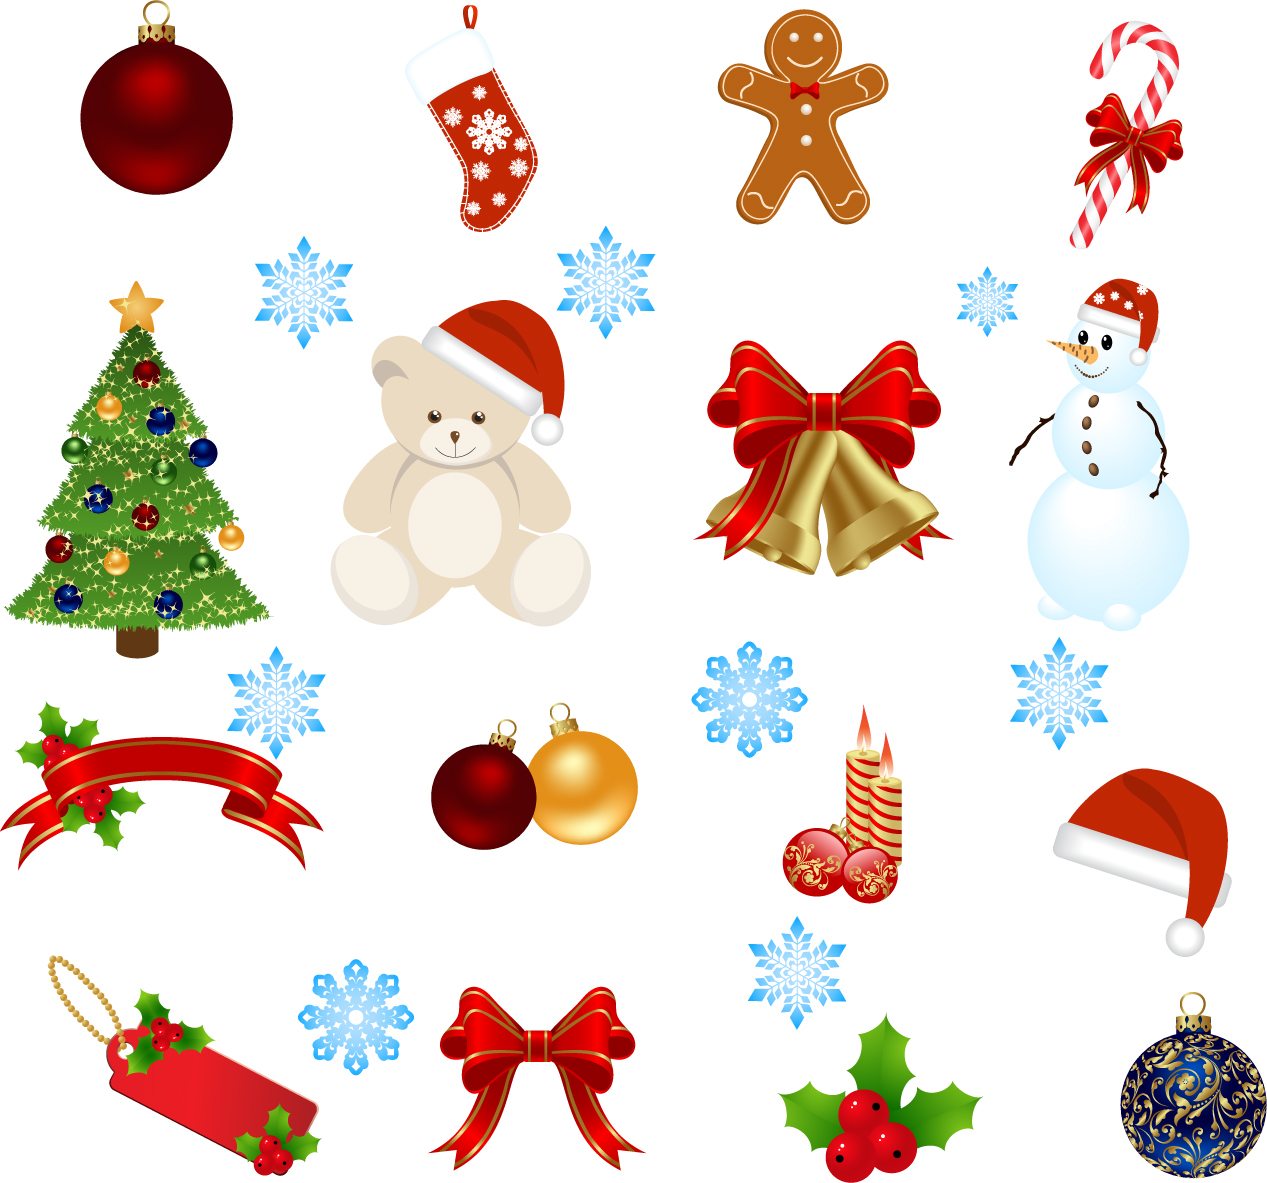 Christmas Cartoon Images Free - Cliparts.co